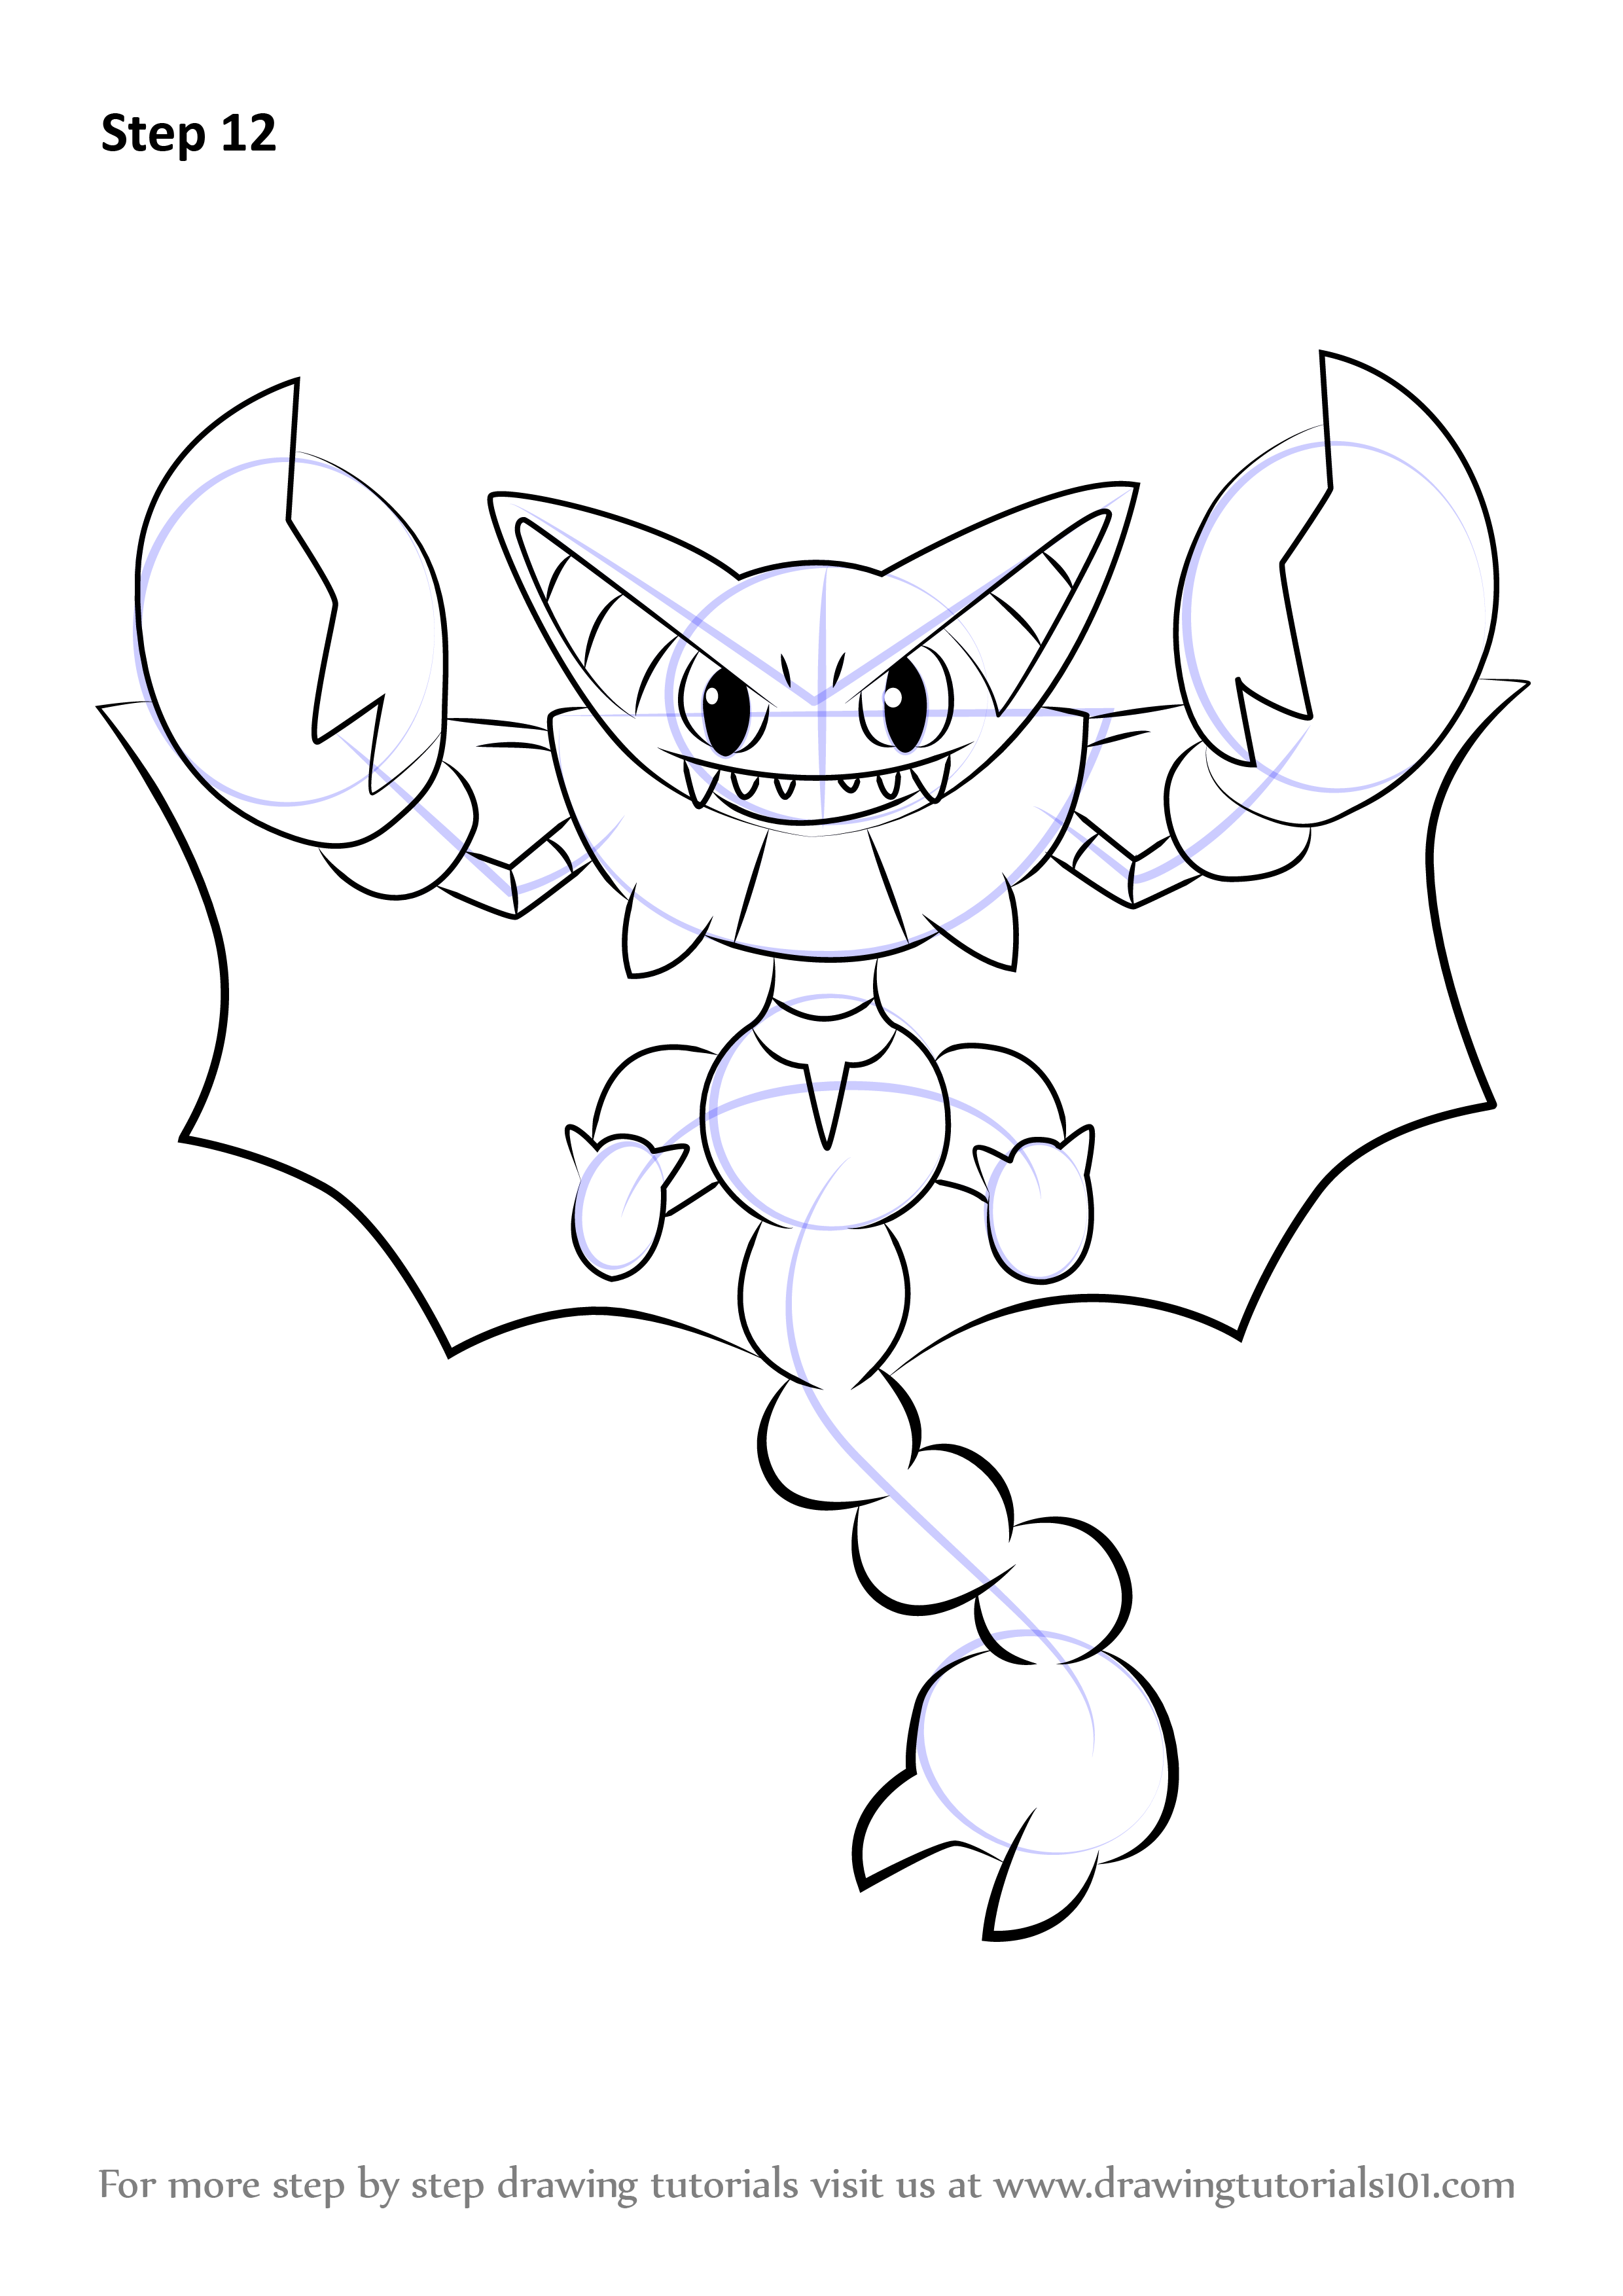 Learn How to Draw Gliscor from Pokemon Pokemon Step by 